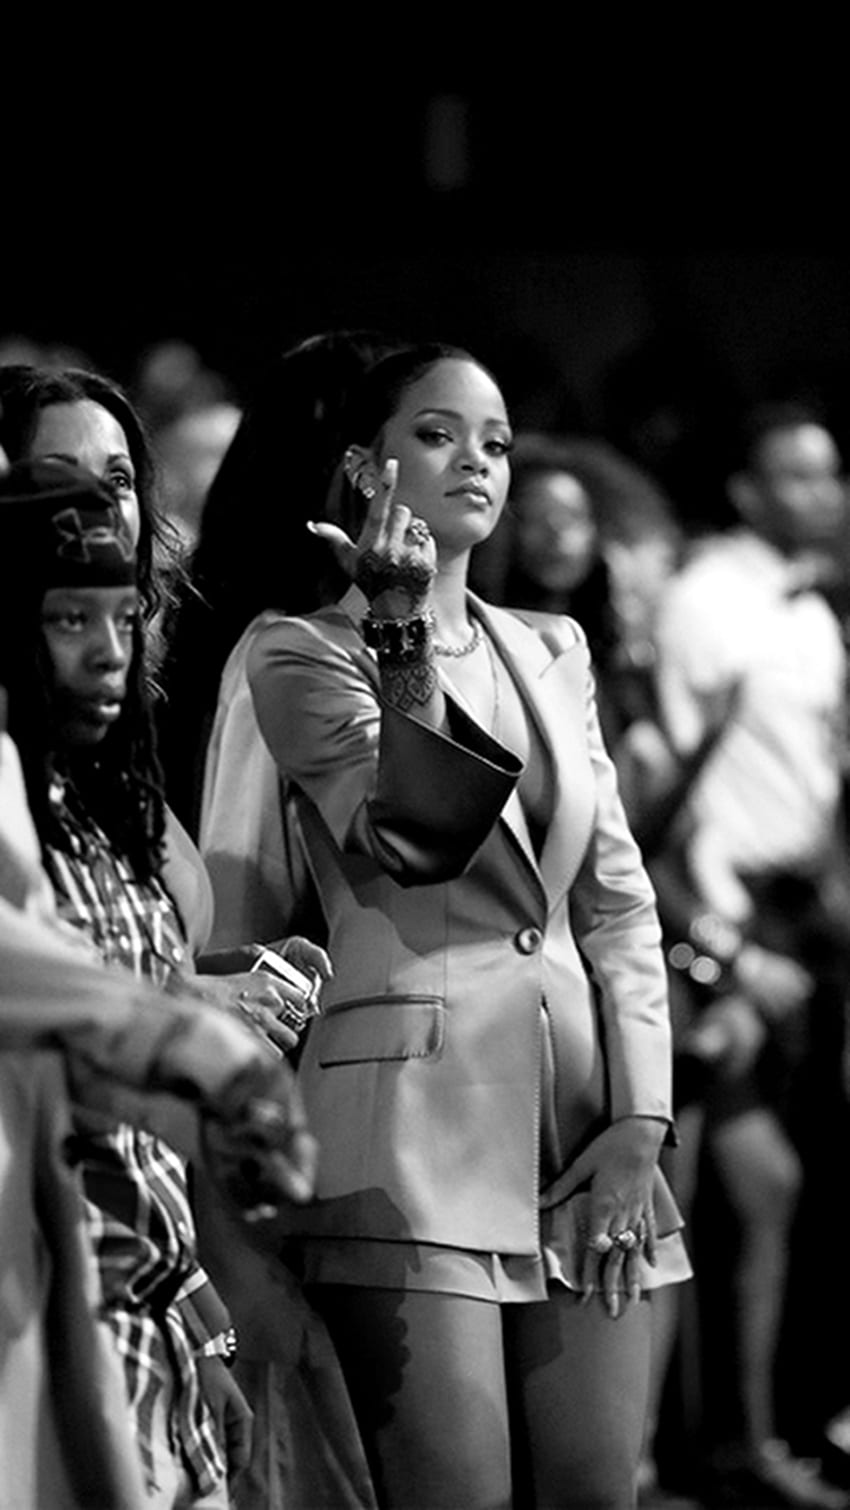 A woman in an outfit is standing on stage - Rihanna